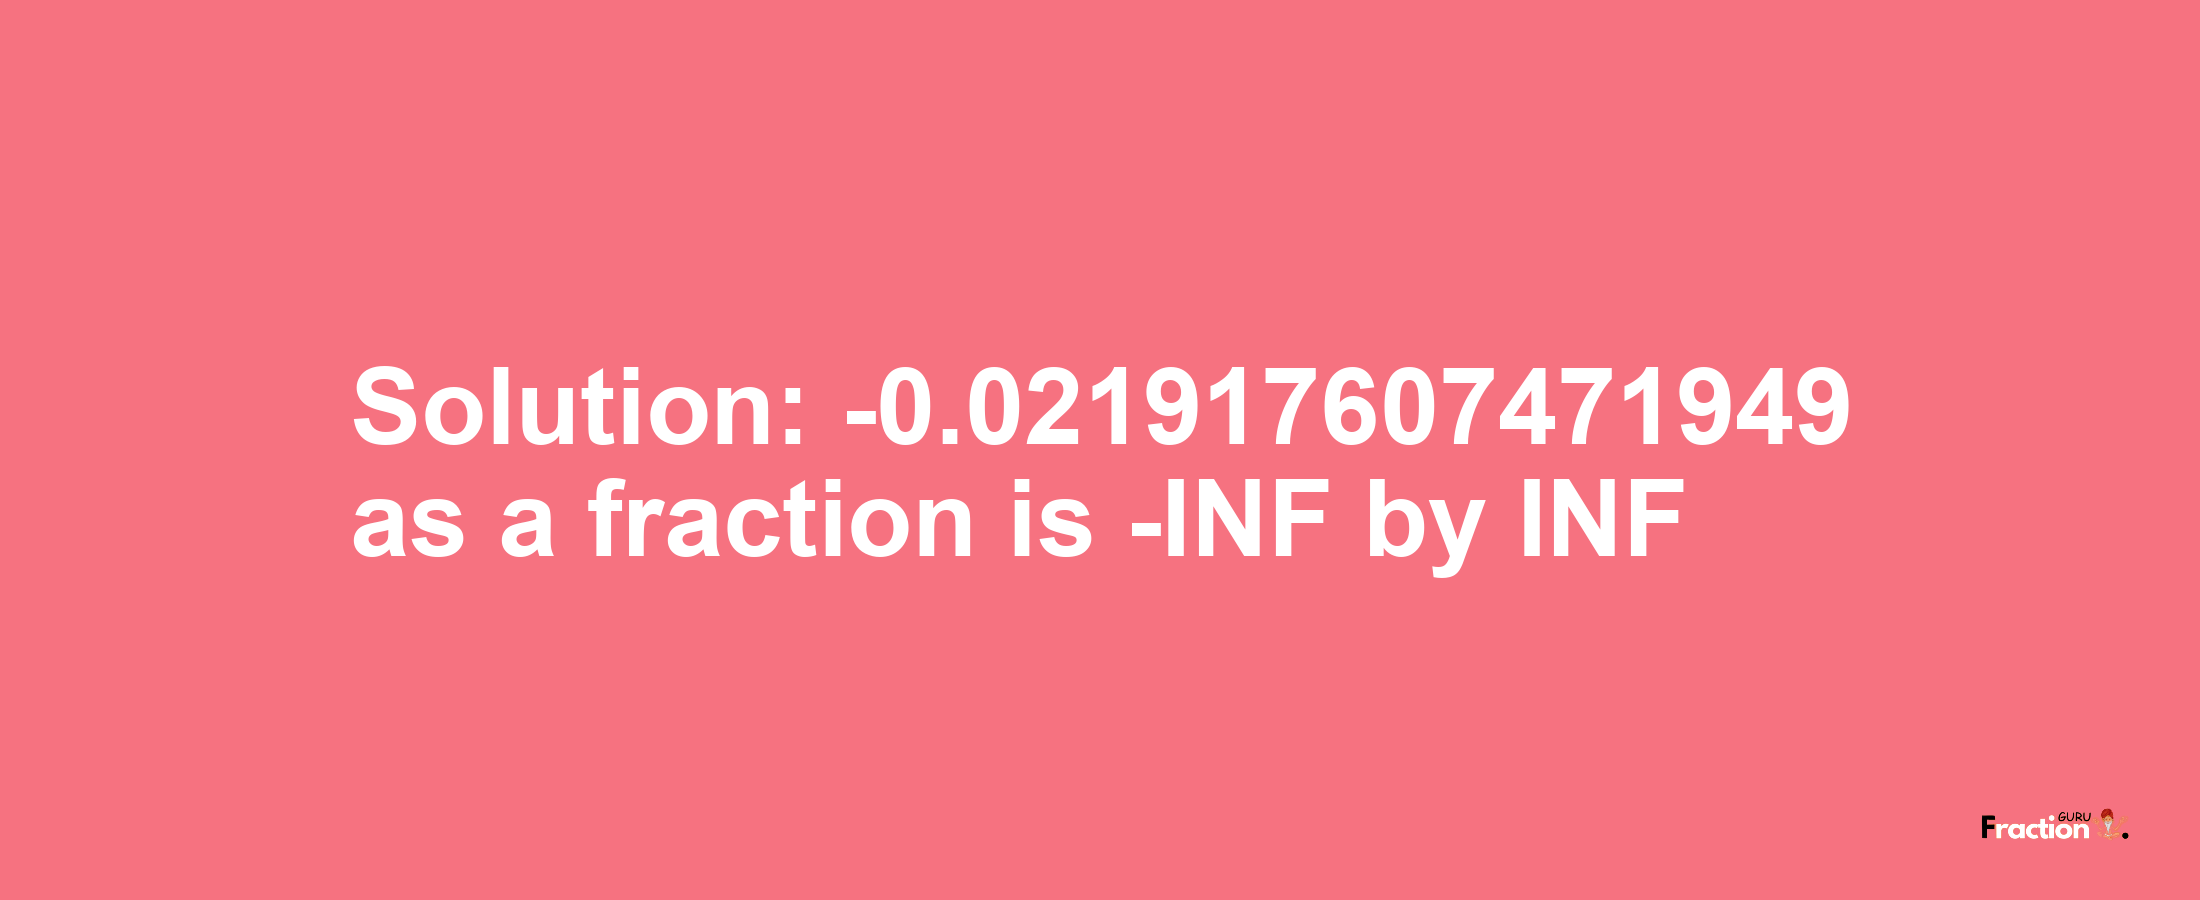 Solution:-0.021917607471949 as a fraction is -INF/INF